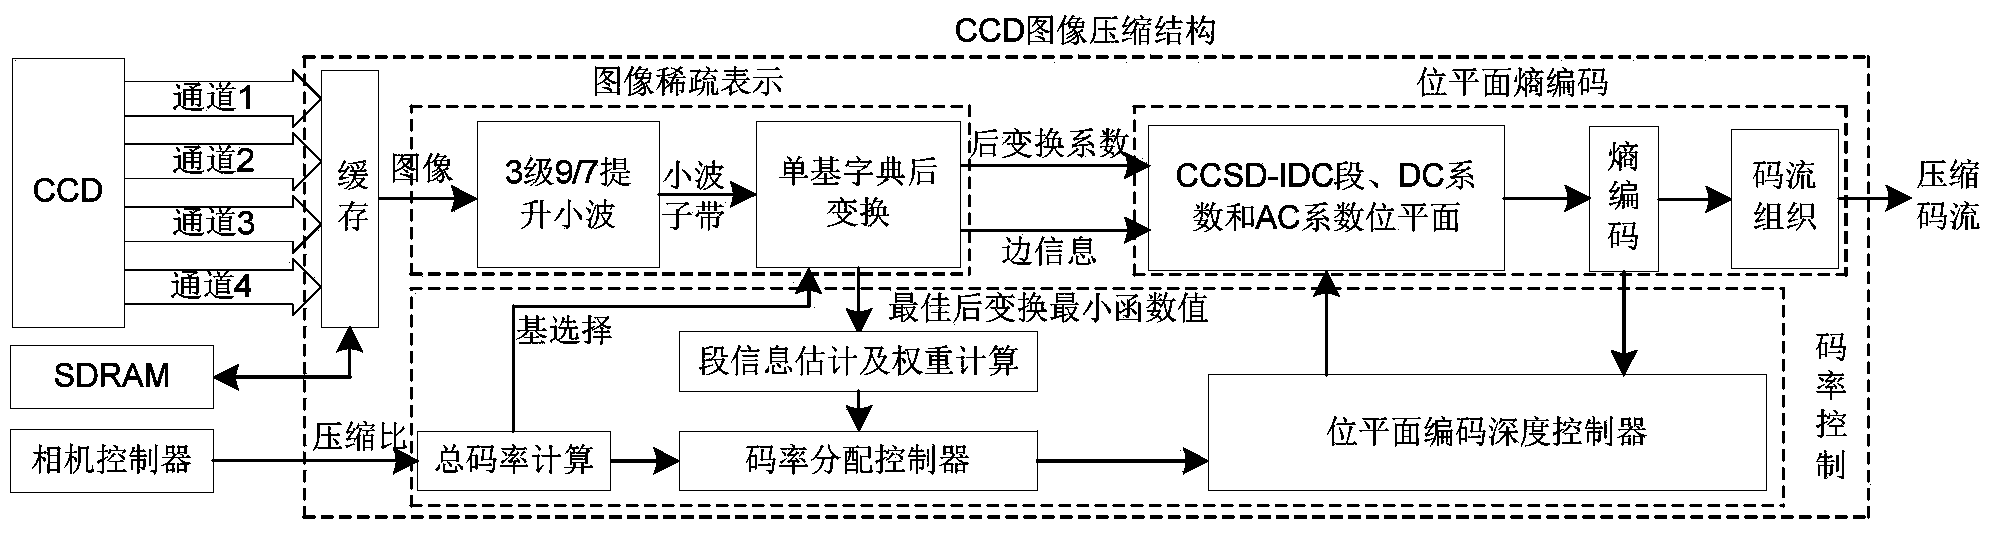 Image compression unit for large visual field TDICCD camera